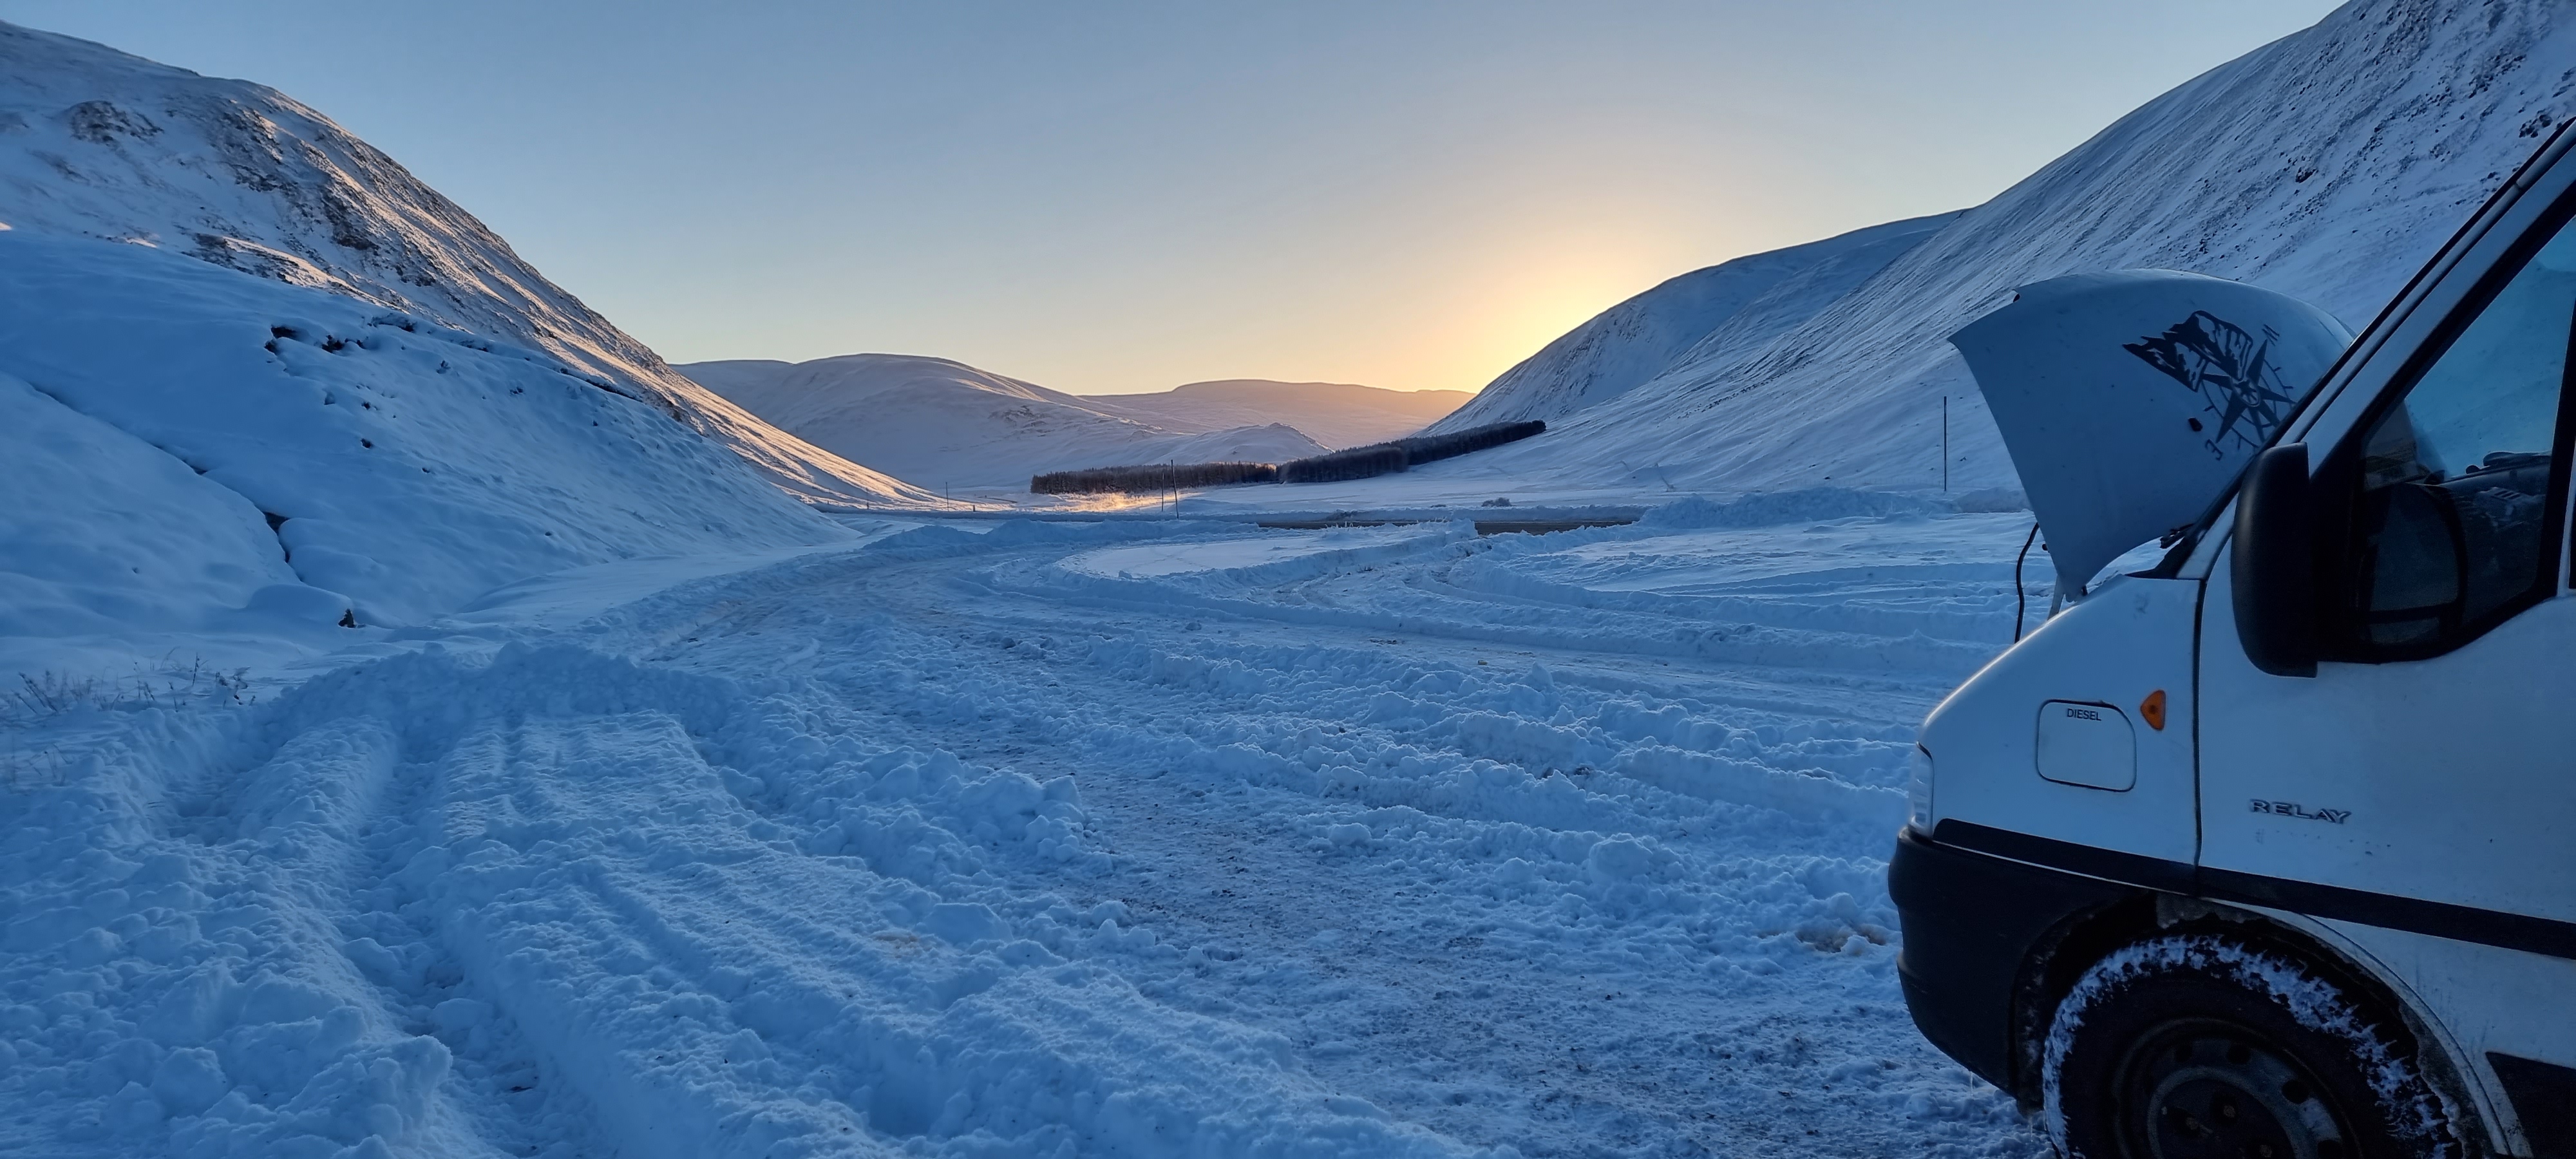 Two friends were left stranded in Aberdeenshire after their van broke down due to freezing cold weather.